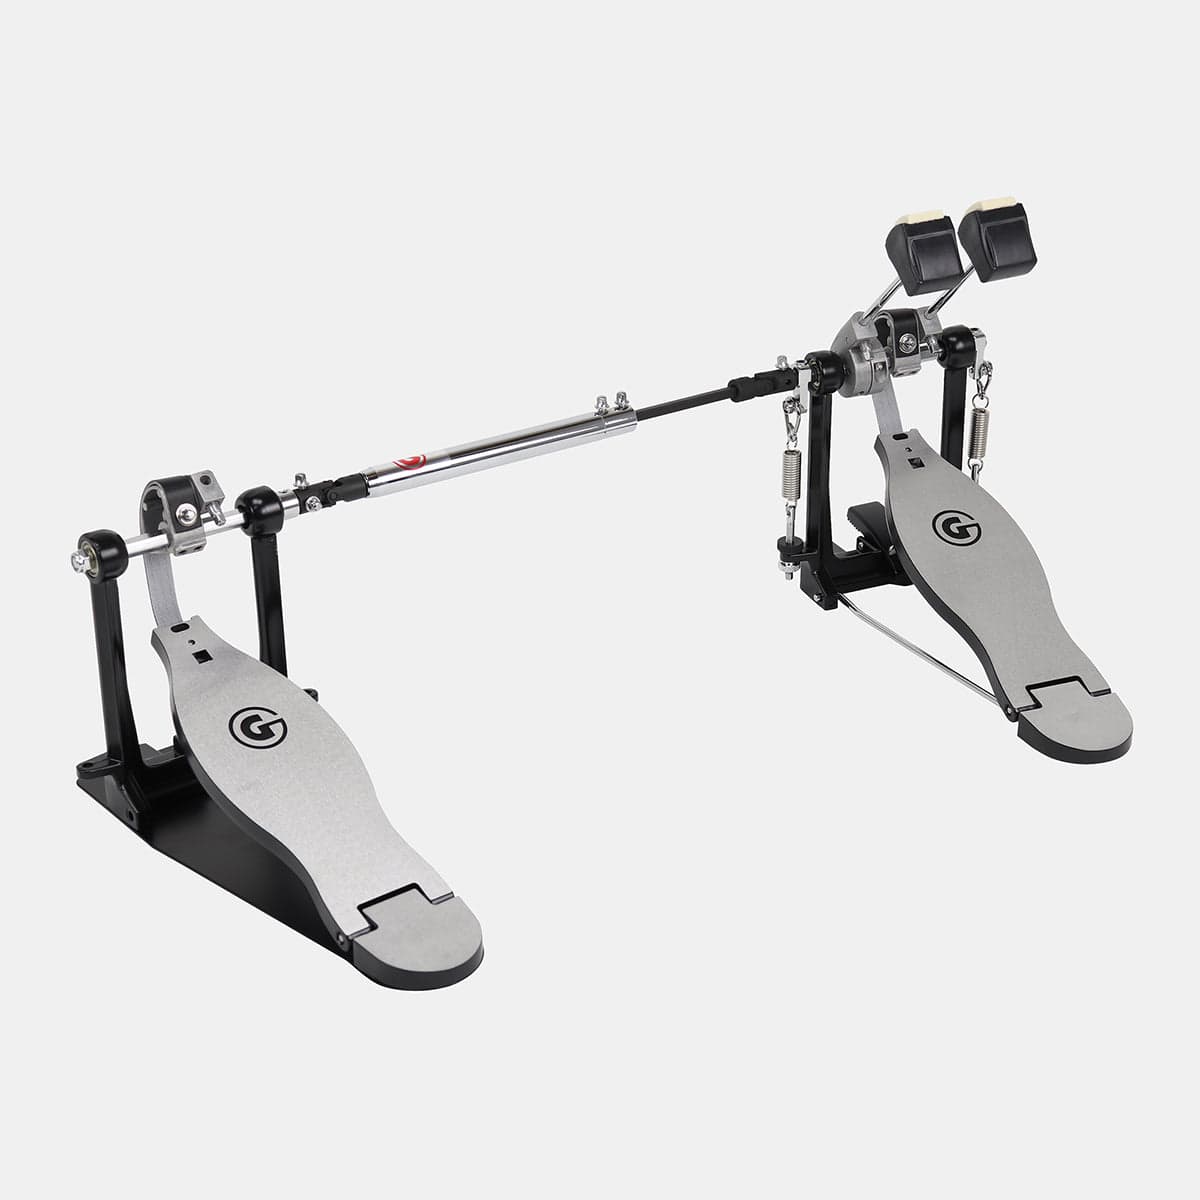  Gibraltar 4711ST-DB 4000 Series Strap Drive Double Bass Pedal double bass drum pedal